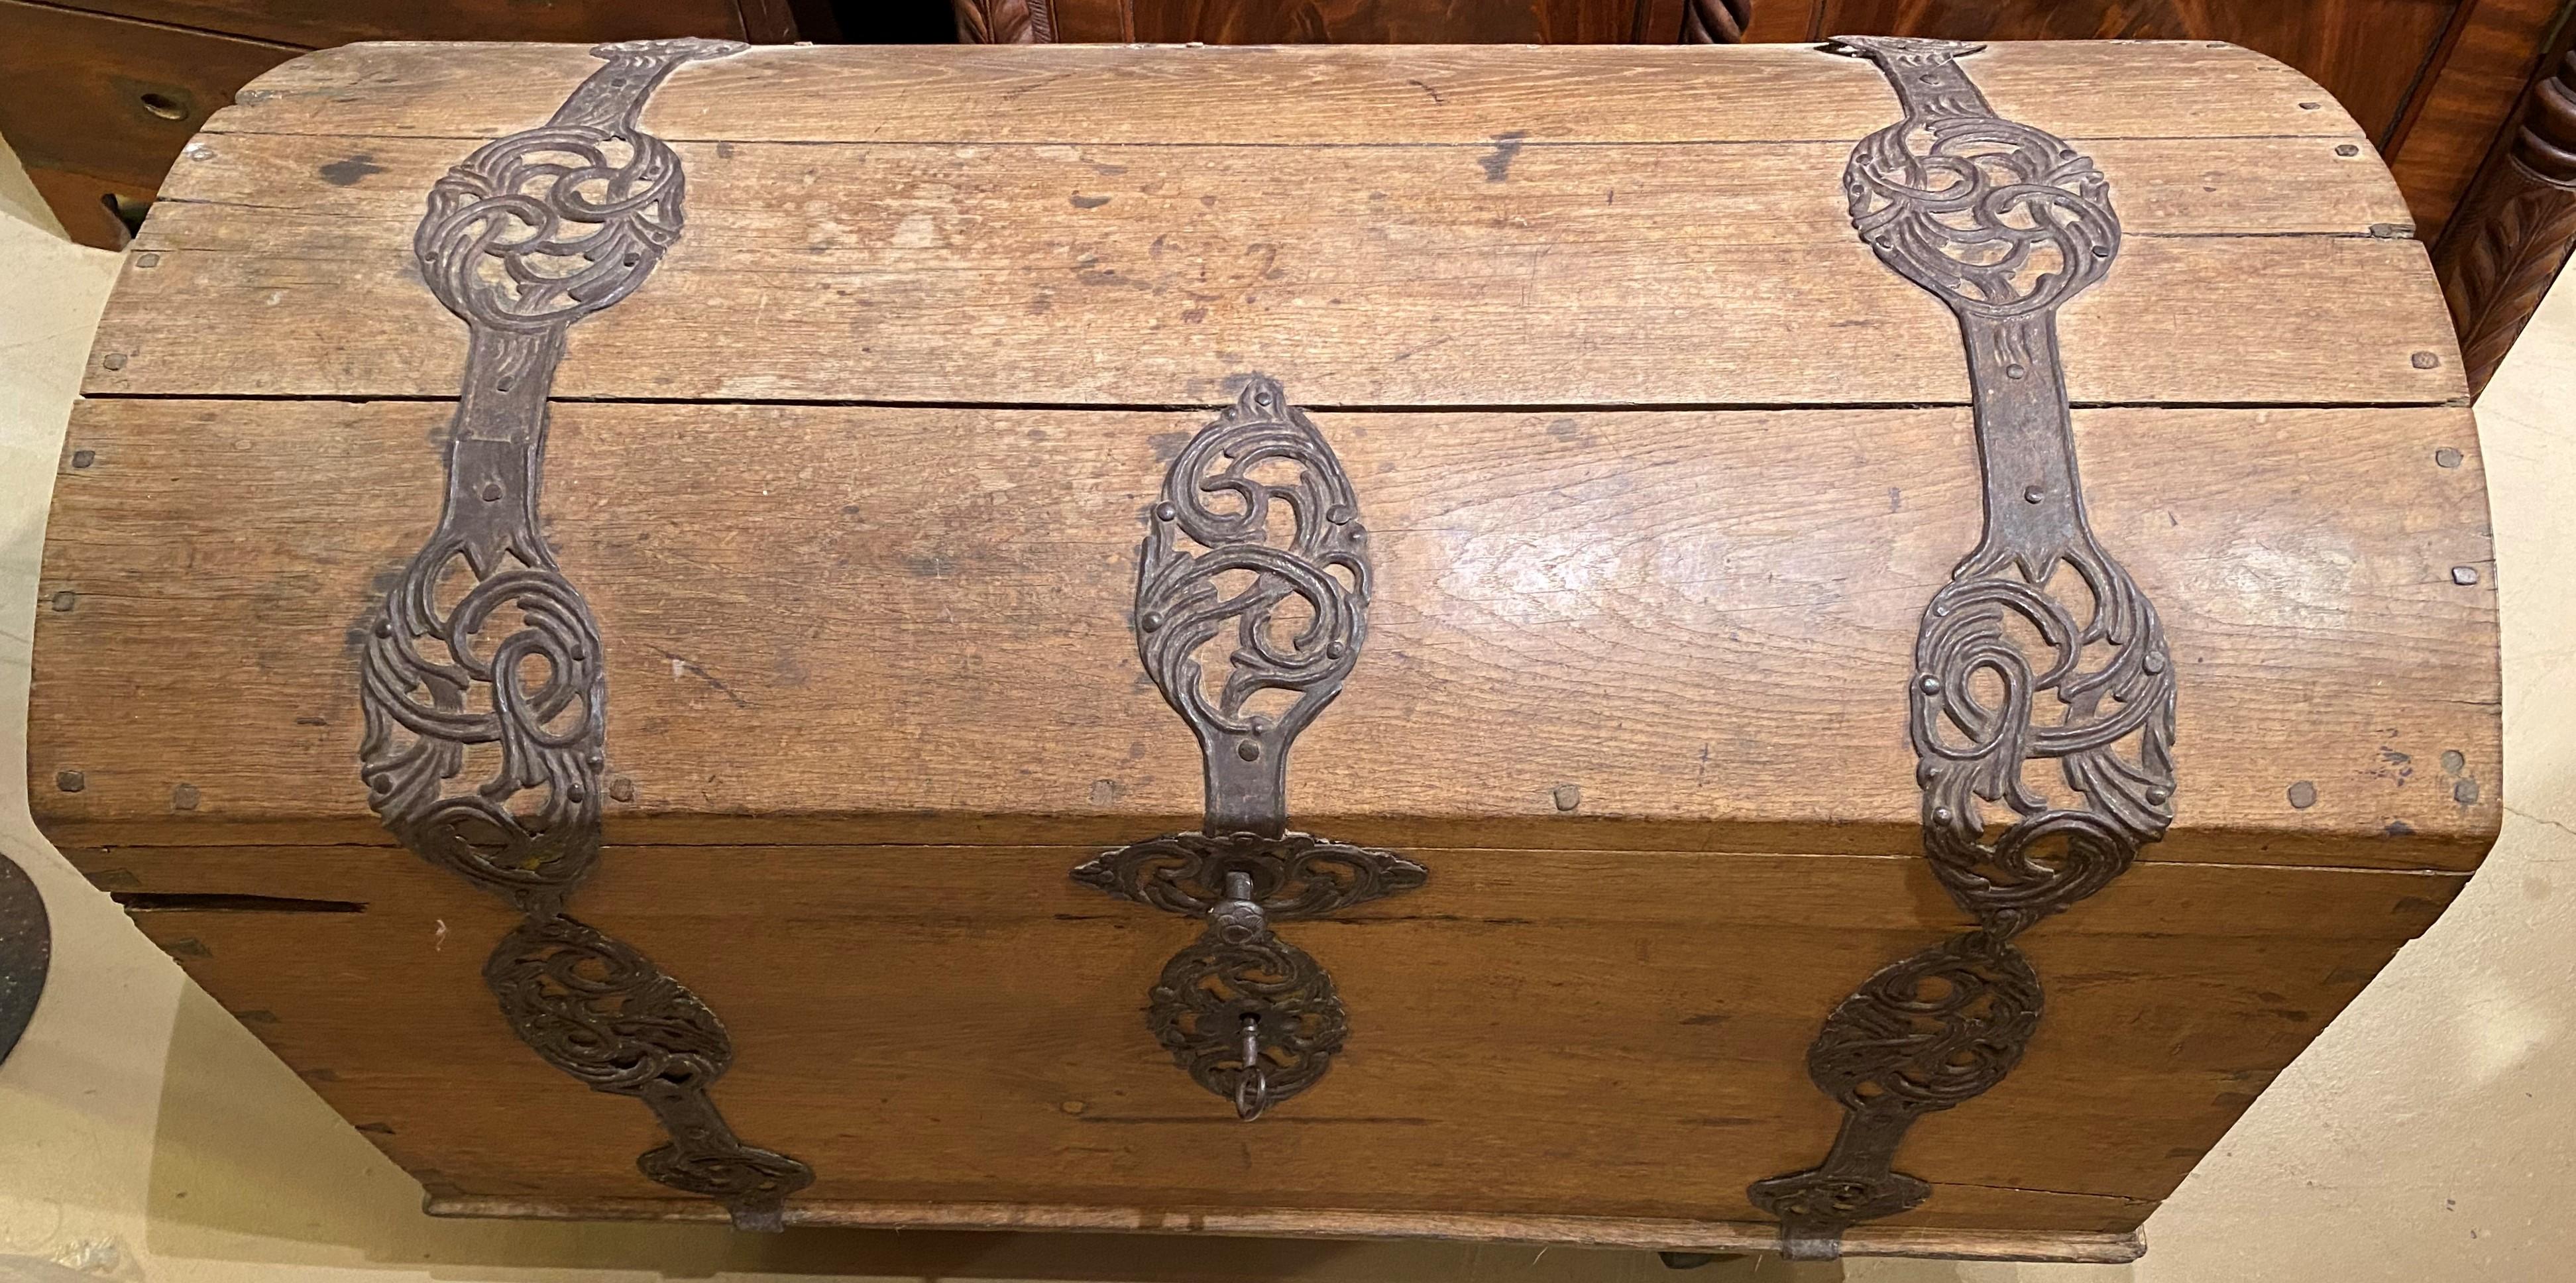 A fine oak dome top trunk with fabulous strap metalwork and hardware, dovetailed construction, and great patina. Continental in origin, dating to the 18th century, in very good overall condition, with some later hinge repair on one side, minor